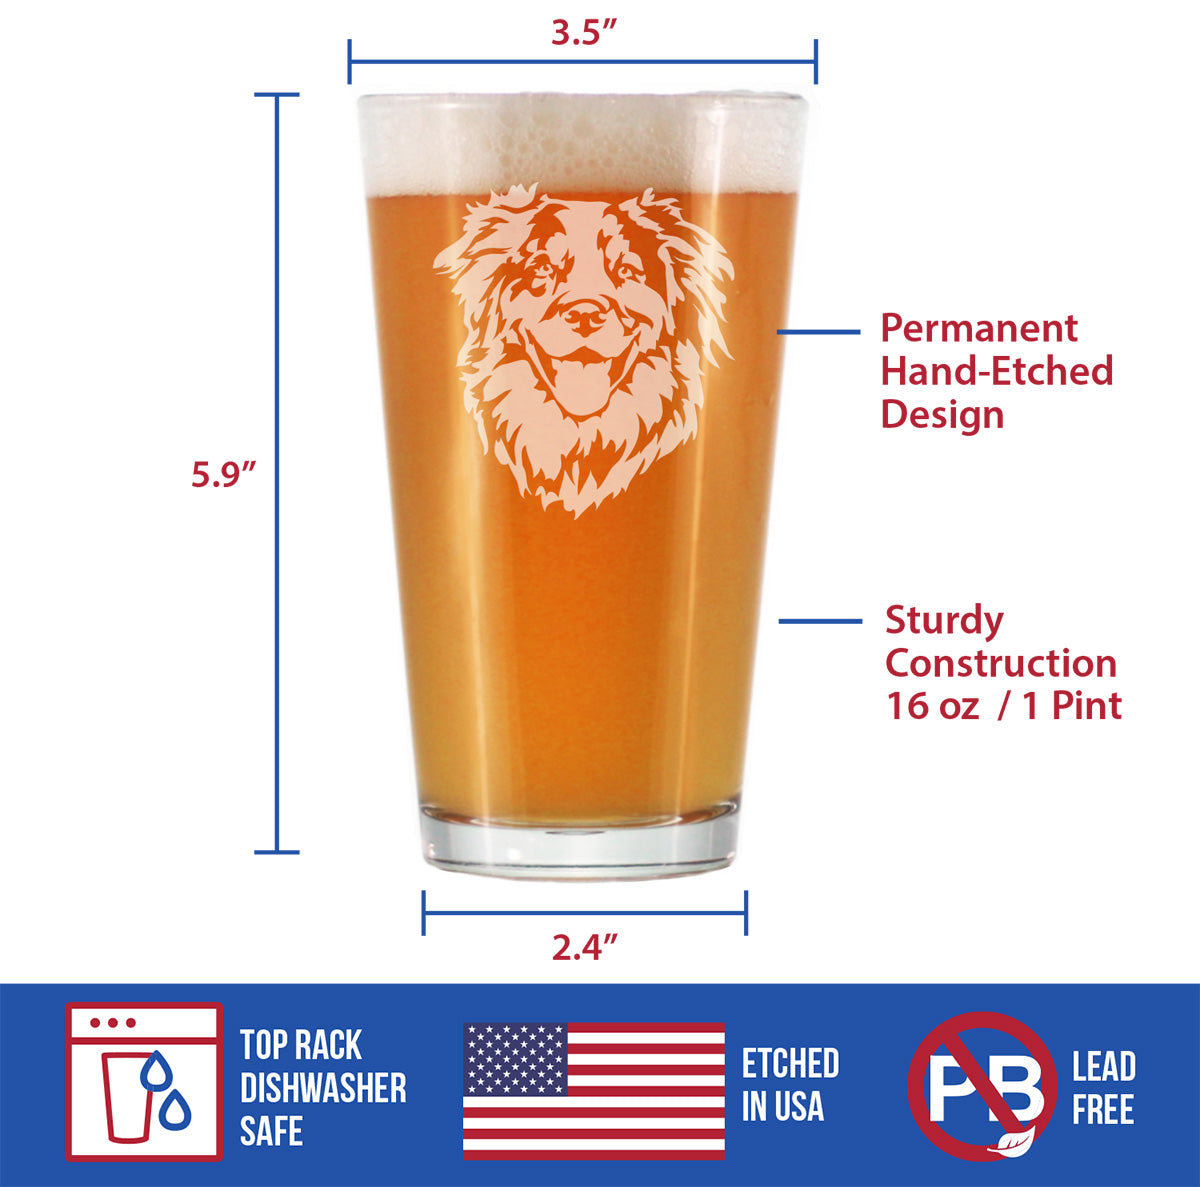 Australian Shepherd Face Pint Glass for Beer - Unique Dog Themed Decor and Gifts for Moms &amp; Dads of Aussies - 16 Oz